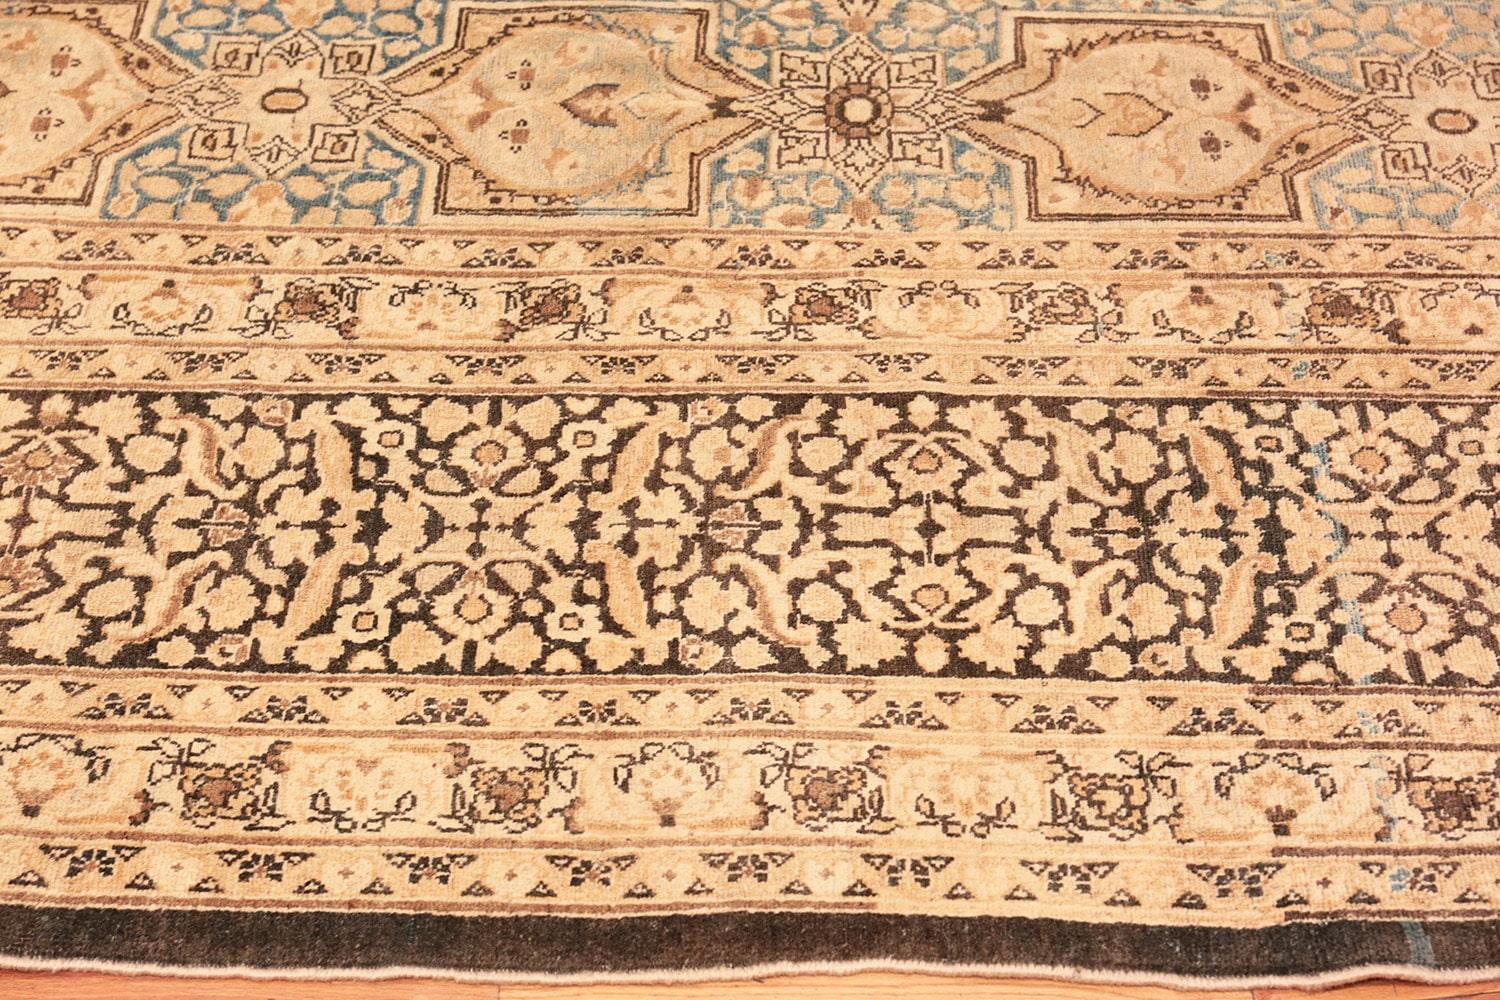 Hand-Knotted Antique Persian Khorassan Rug. Size: 8' 7